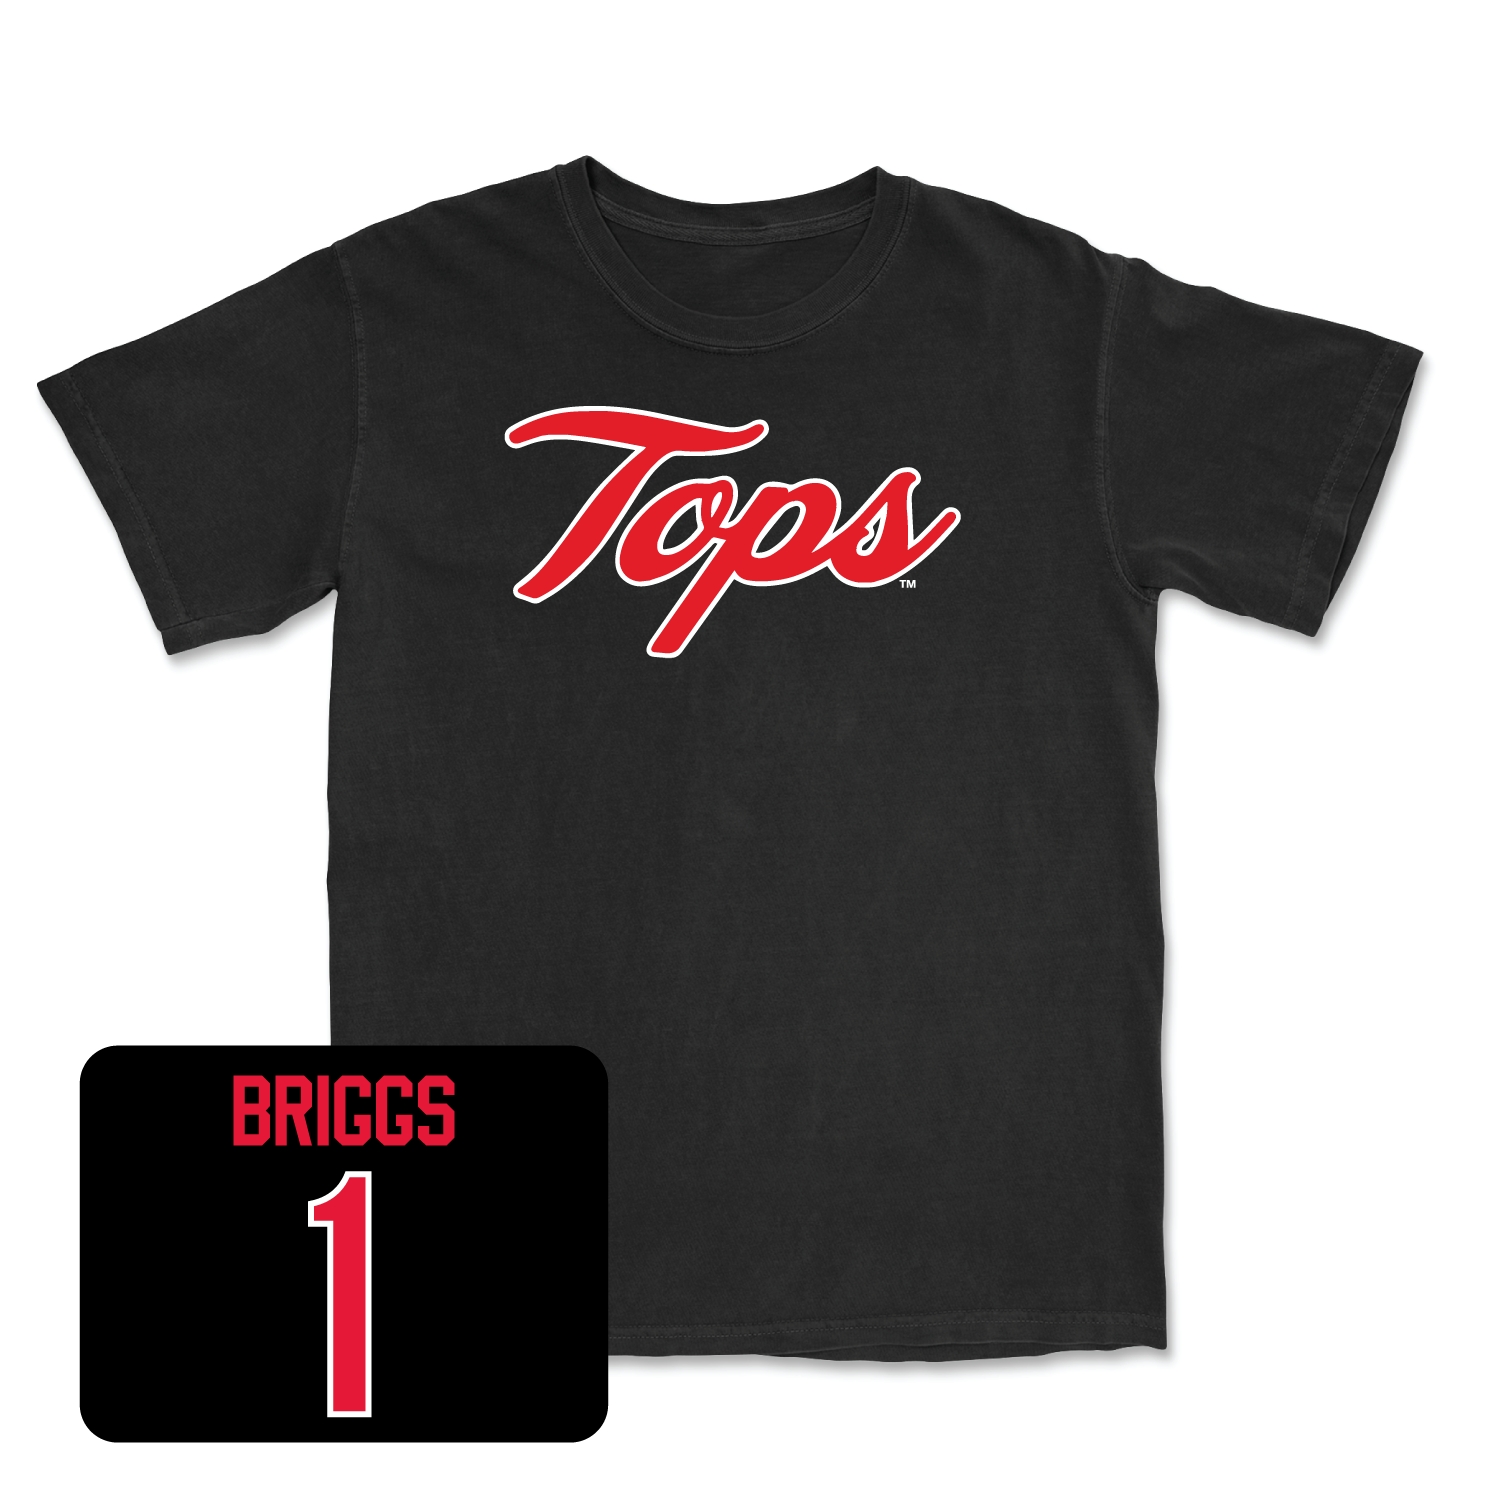 Black Women's Volleyball Tops Tee 2X-Large / Paige Briggs | #1